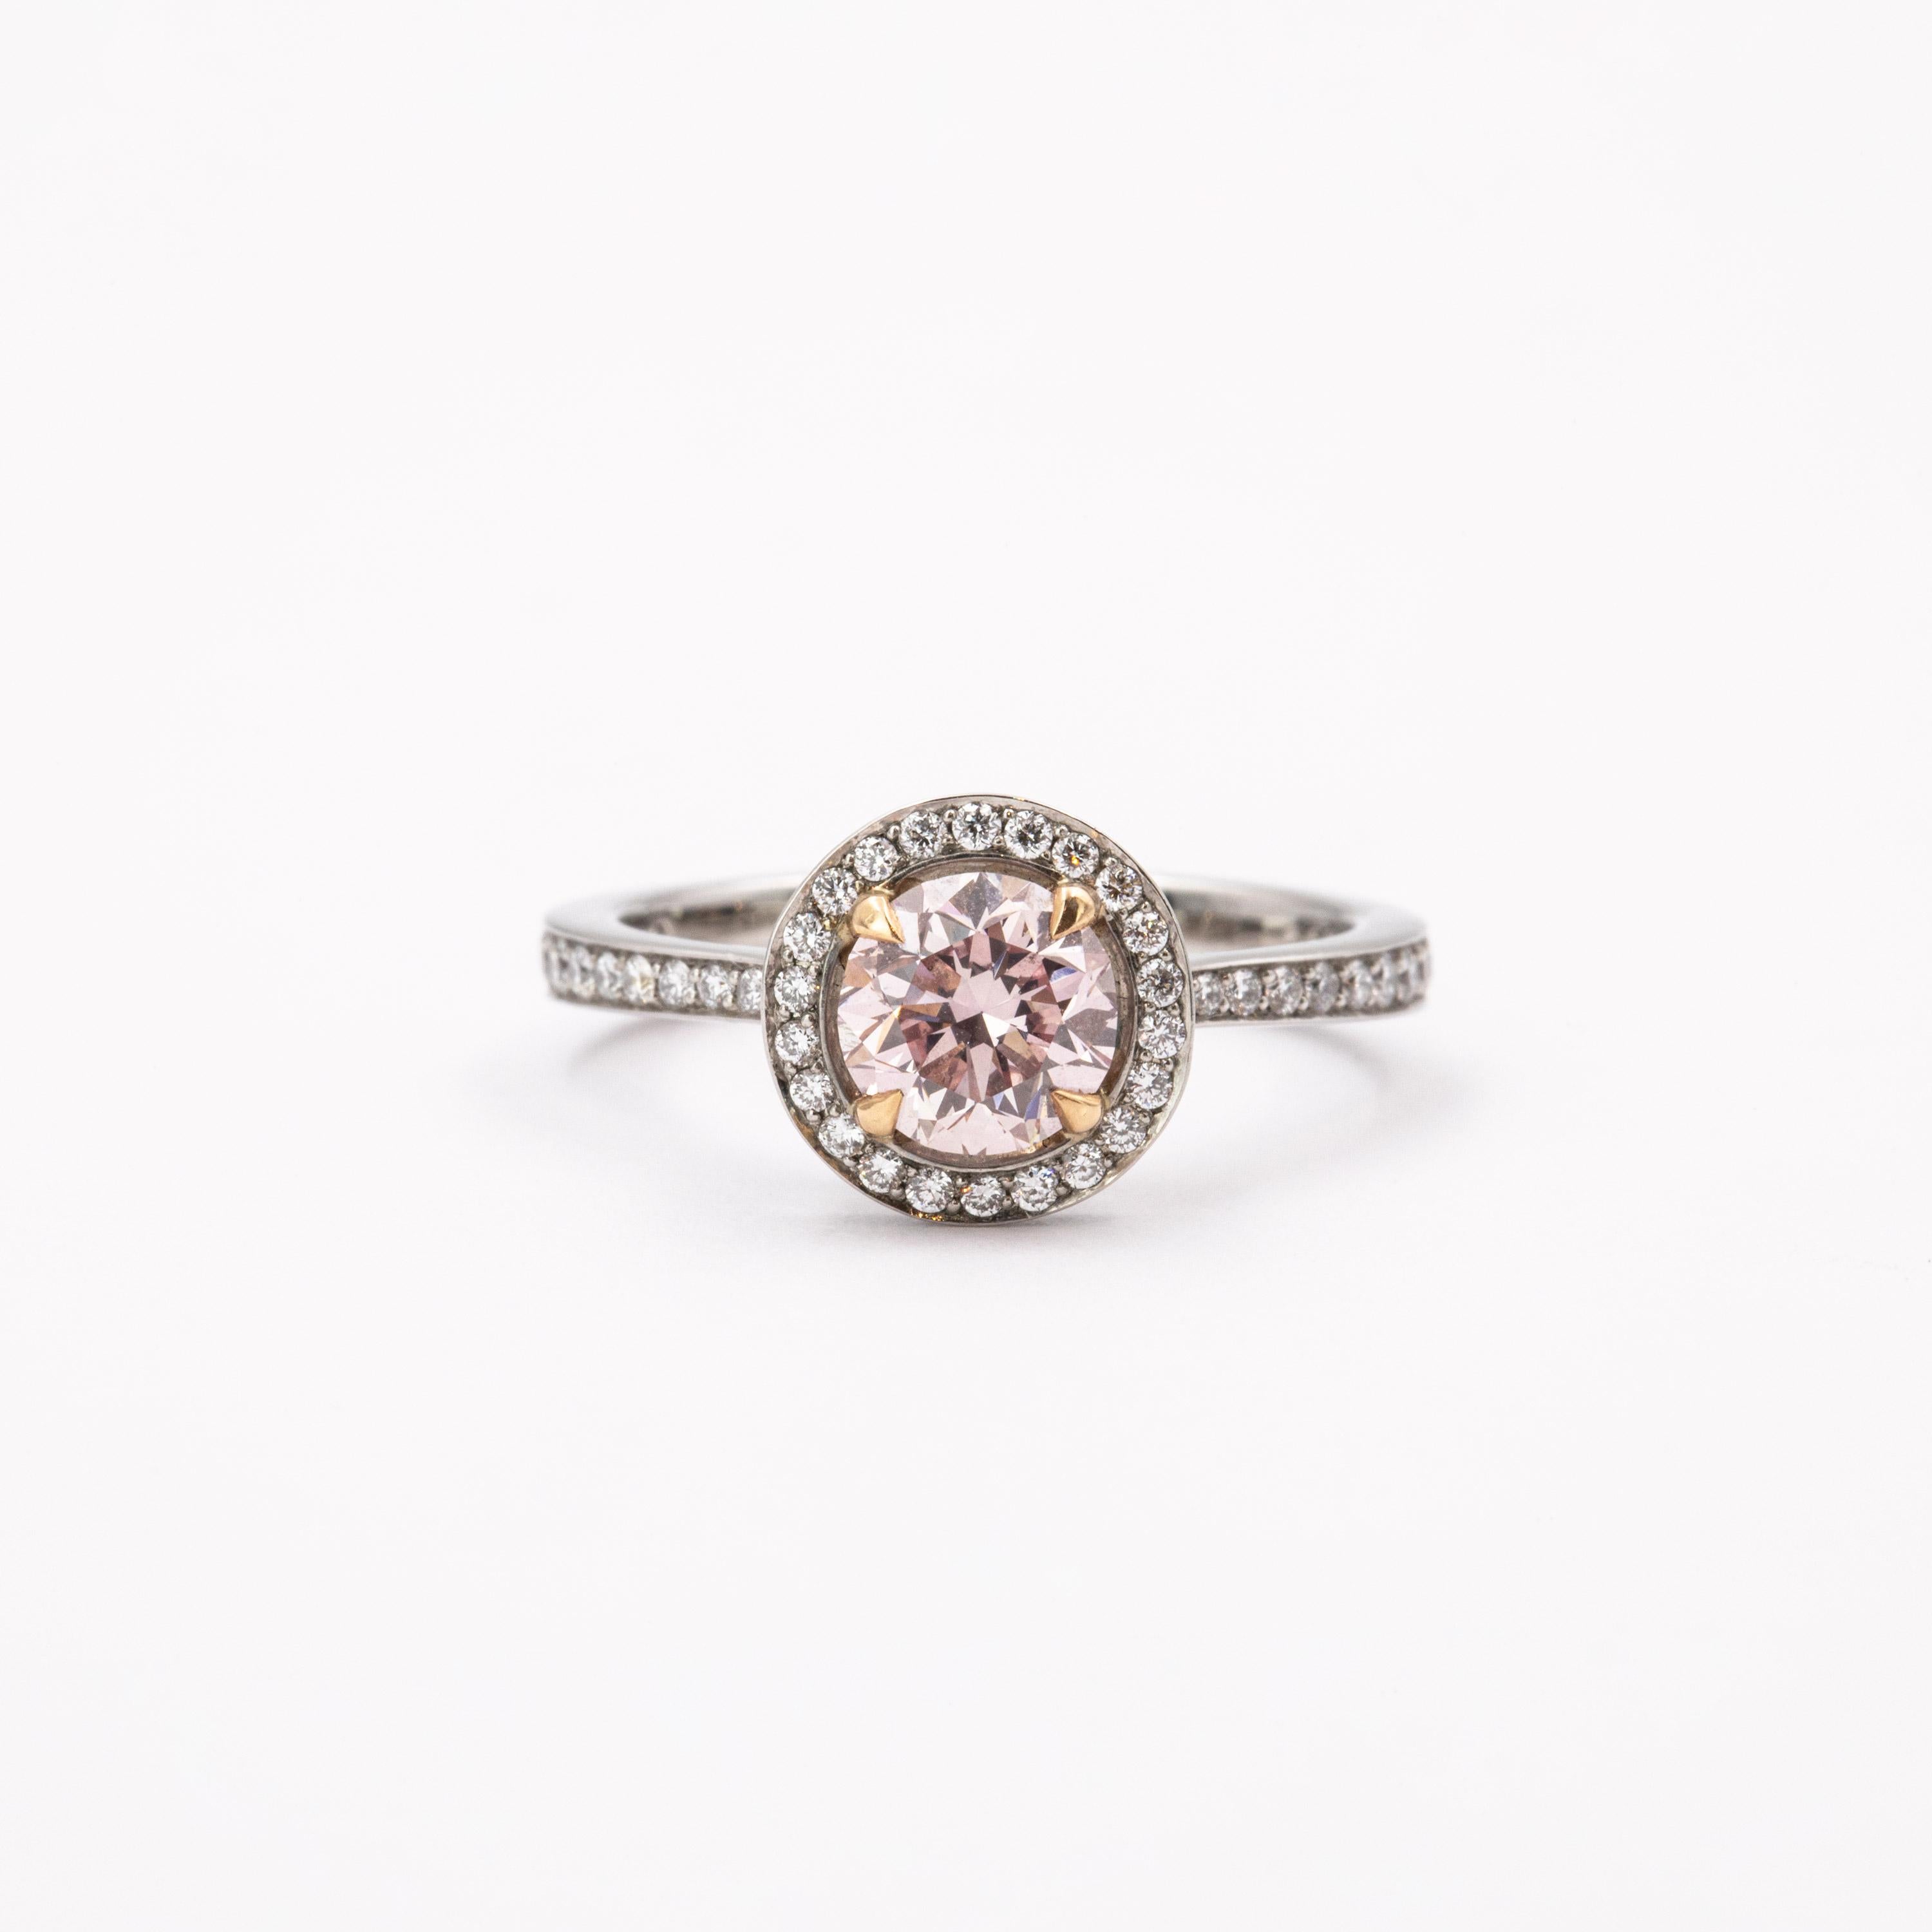 A natural fancy intense pink diamond (HRD certified), weighing 1.01 carats, is the heart of this enchanting piece. A delicate circle of white diamonds surrounds the centerstone, floating above a hidden halo which unites the pavé-set shank’s ends.